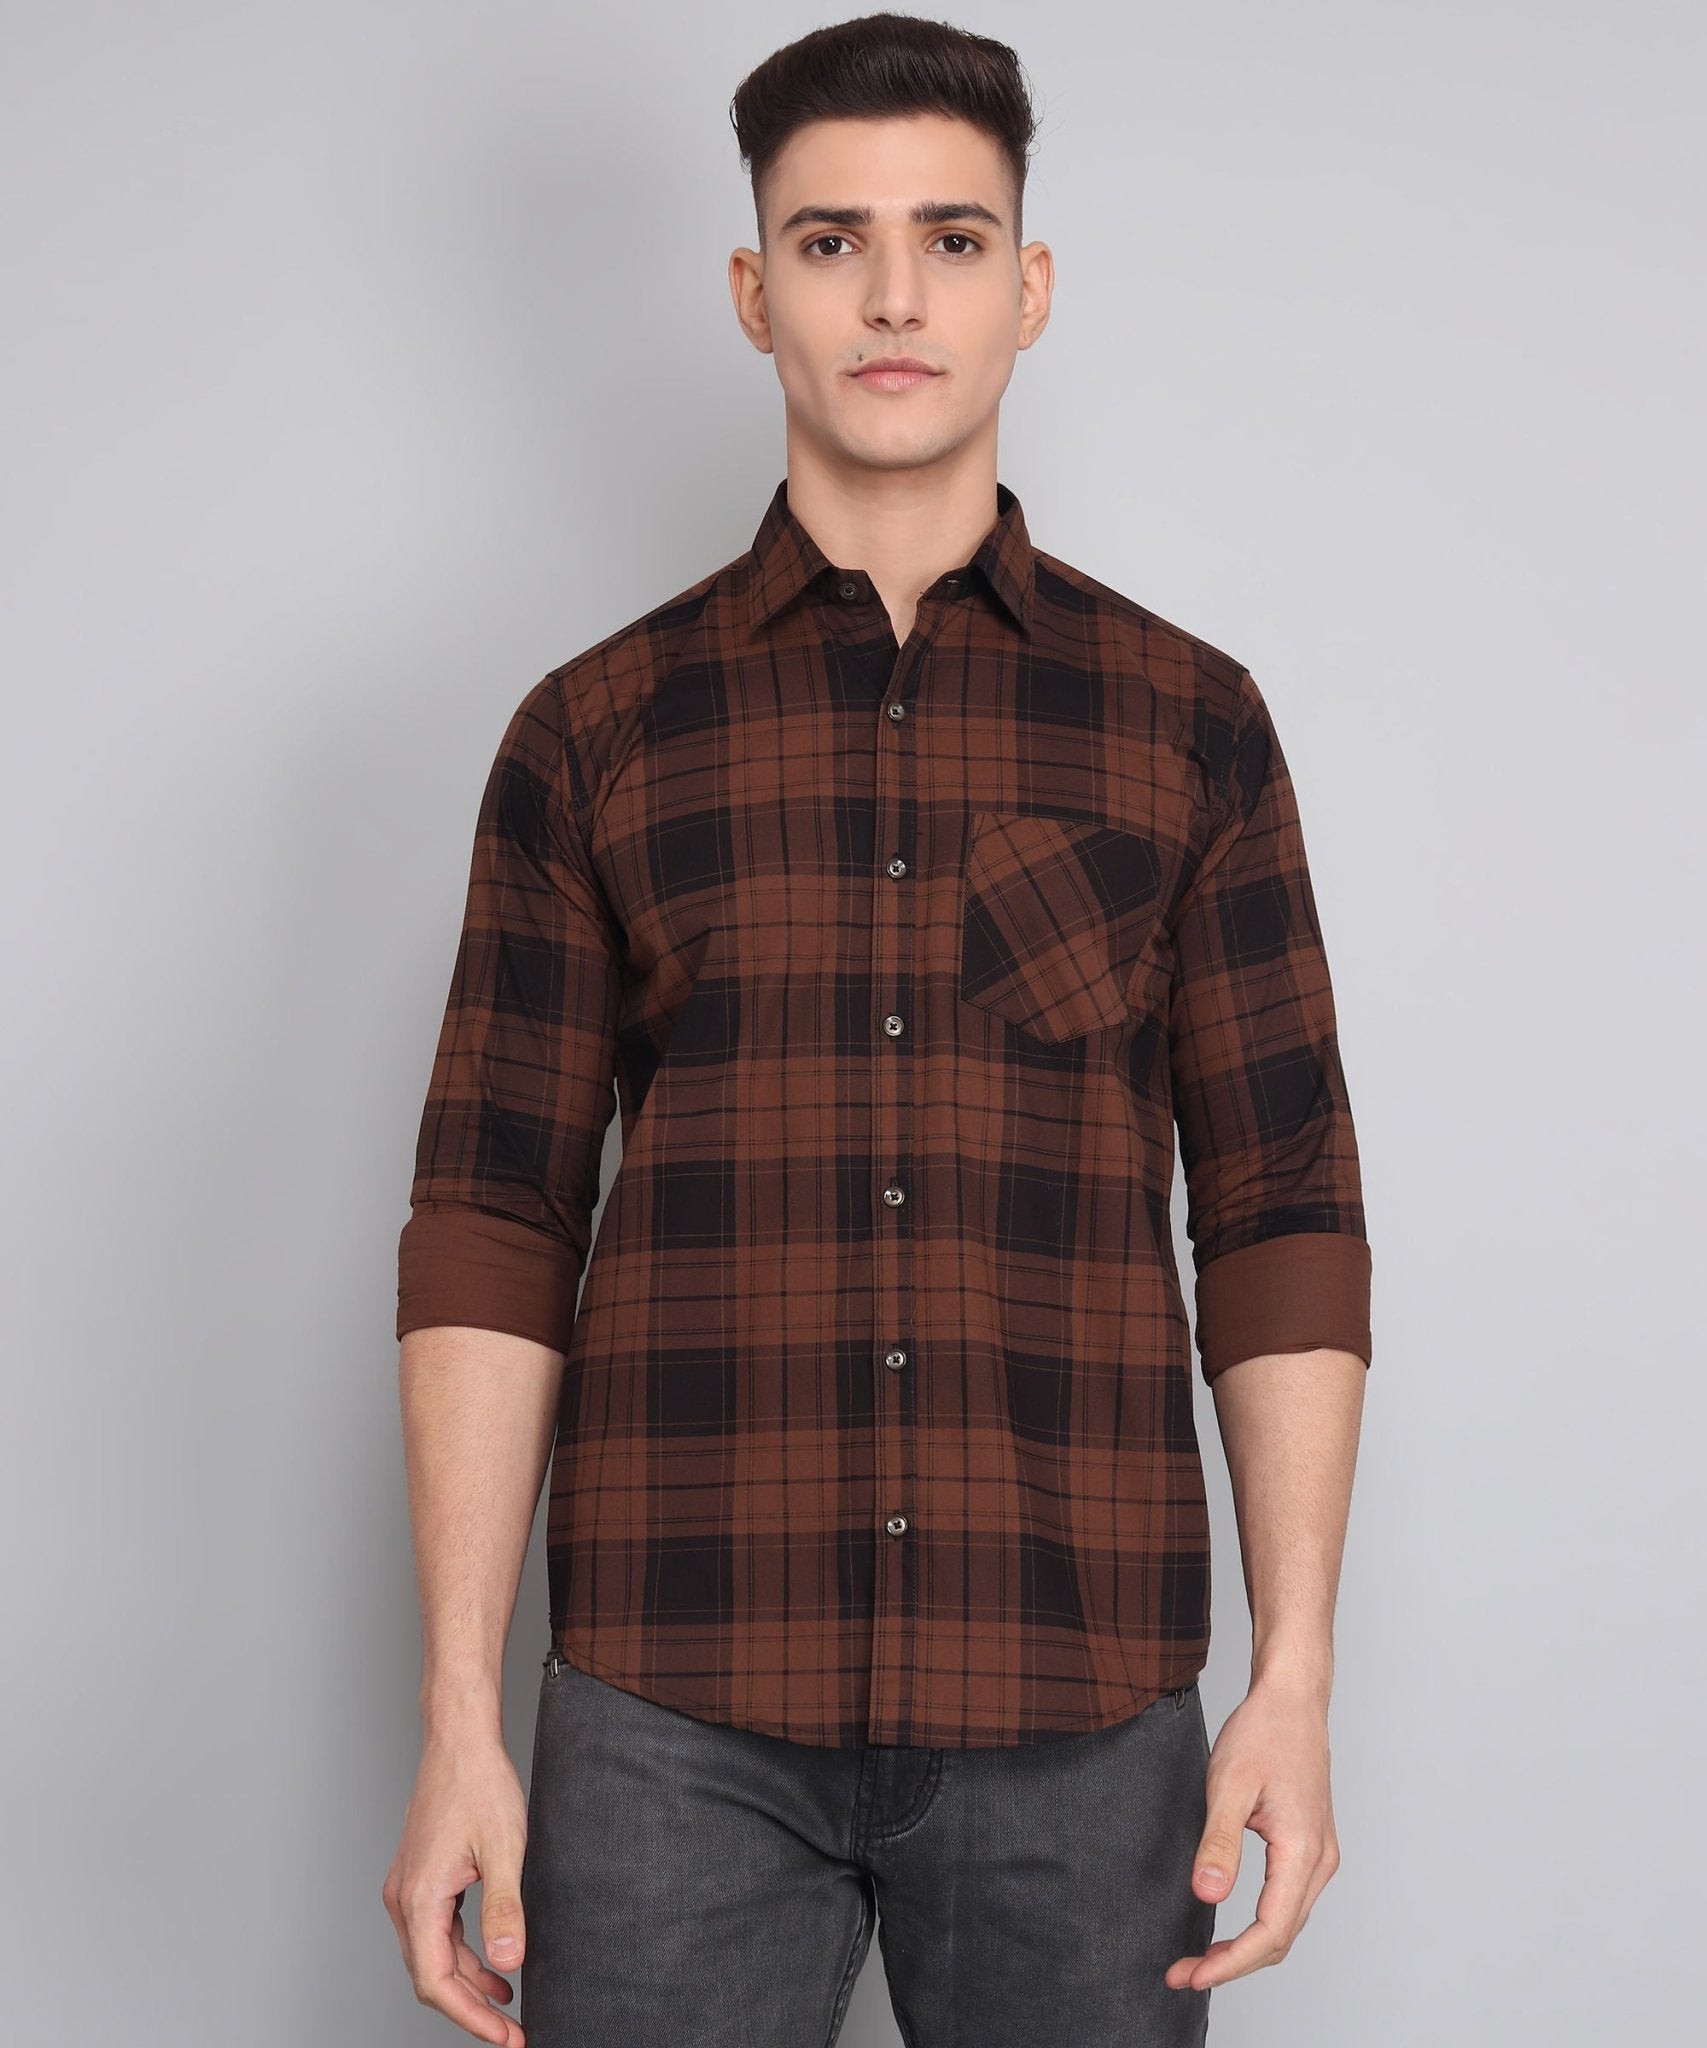 TryBuy Premium Exclusive Brown Black Cotton Casual Checks Shirt for Men - TryBuy® USA🇺🇸